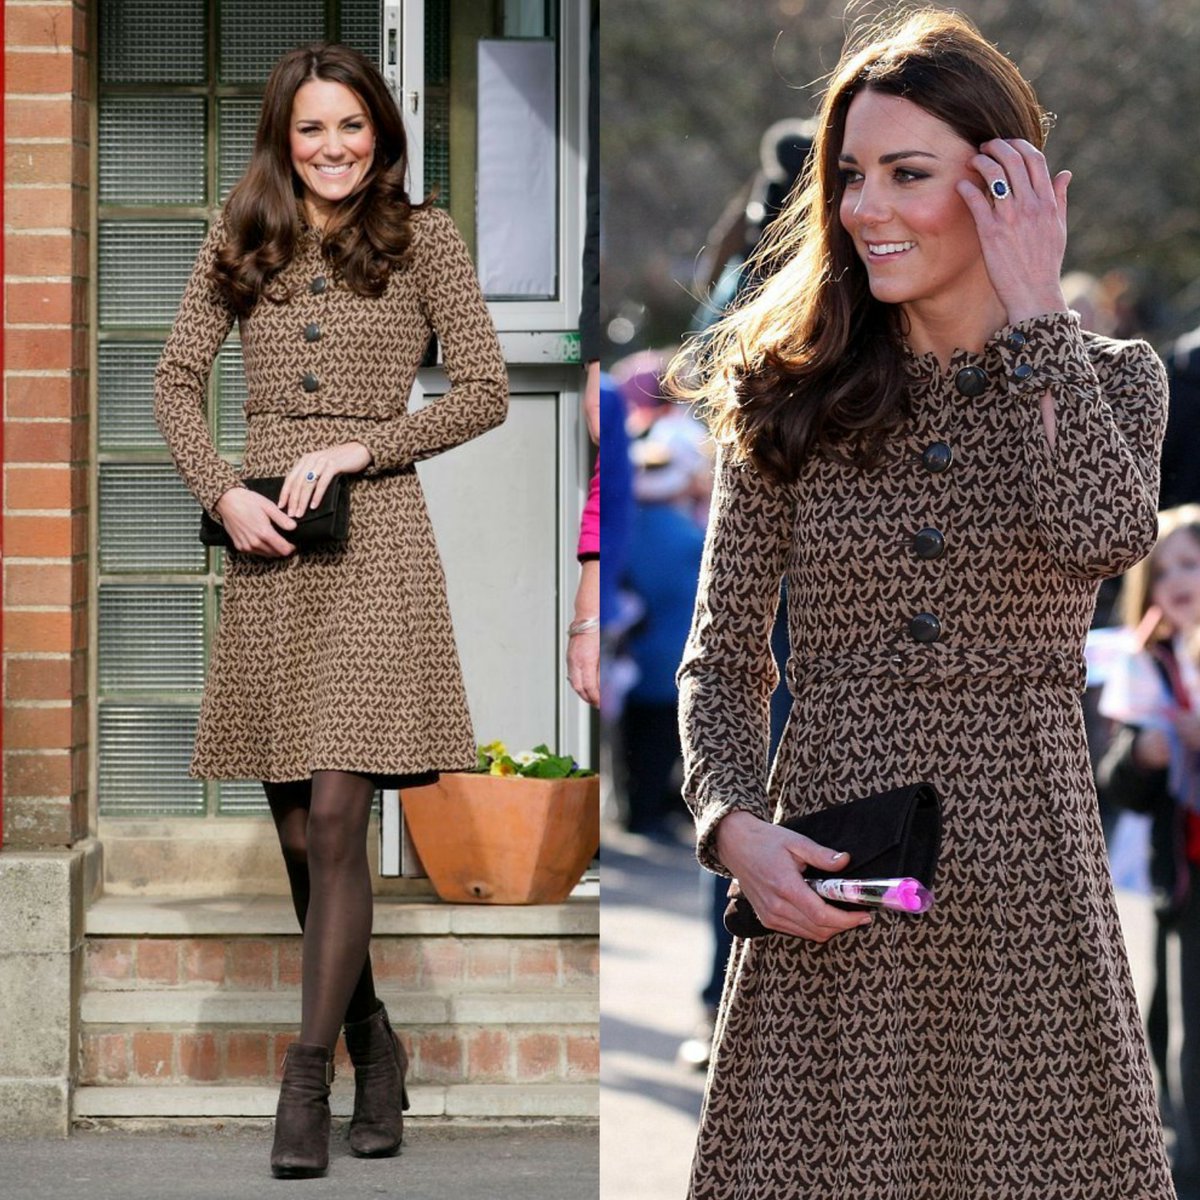 Love this adorable outfit on our beautiful Princess Catherine 💝 
#PrincessofWales #PrincessCatherine #CatherinePrincessOfWales #TeamCatherine #TeamWales #RoyalFamily #IStandWithCatherine #CatherineWeLoveYou #CatherineIsQueen #PrincessCatherineOfWales @KensingtonRoyal